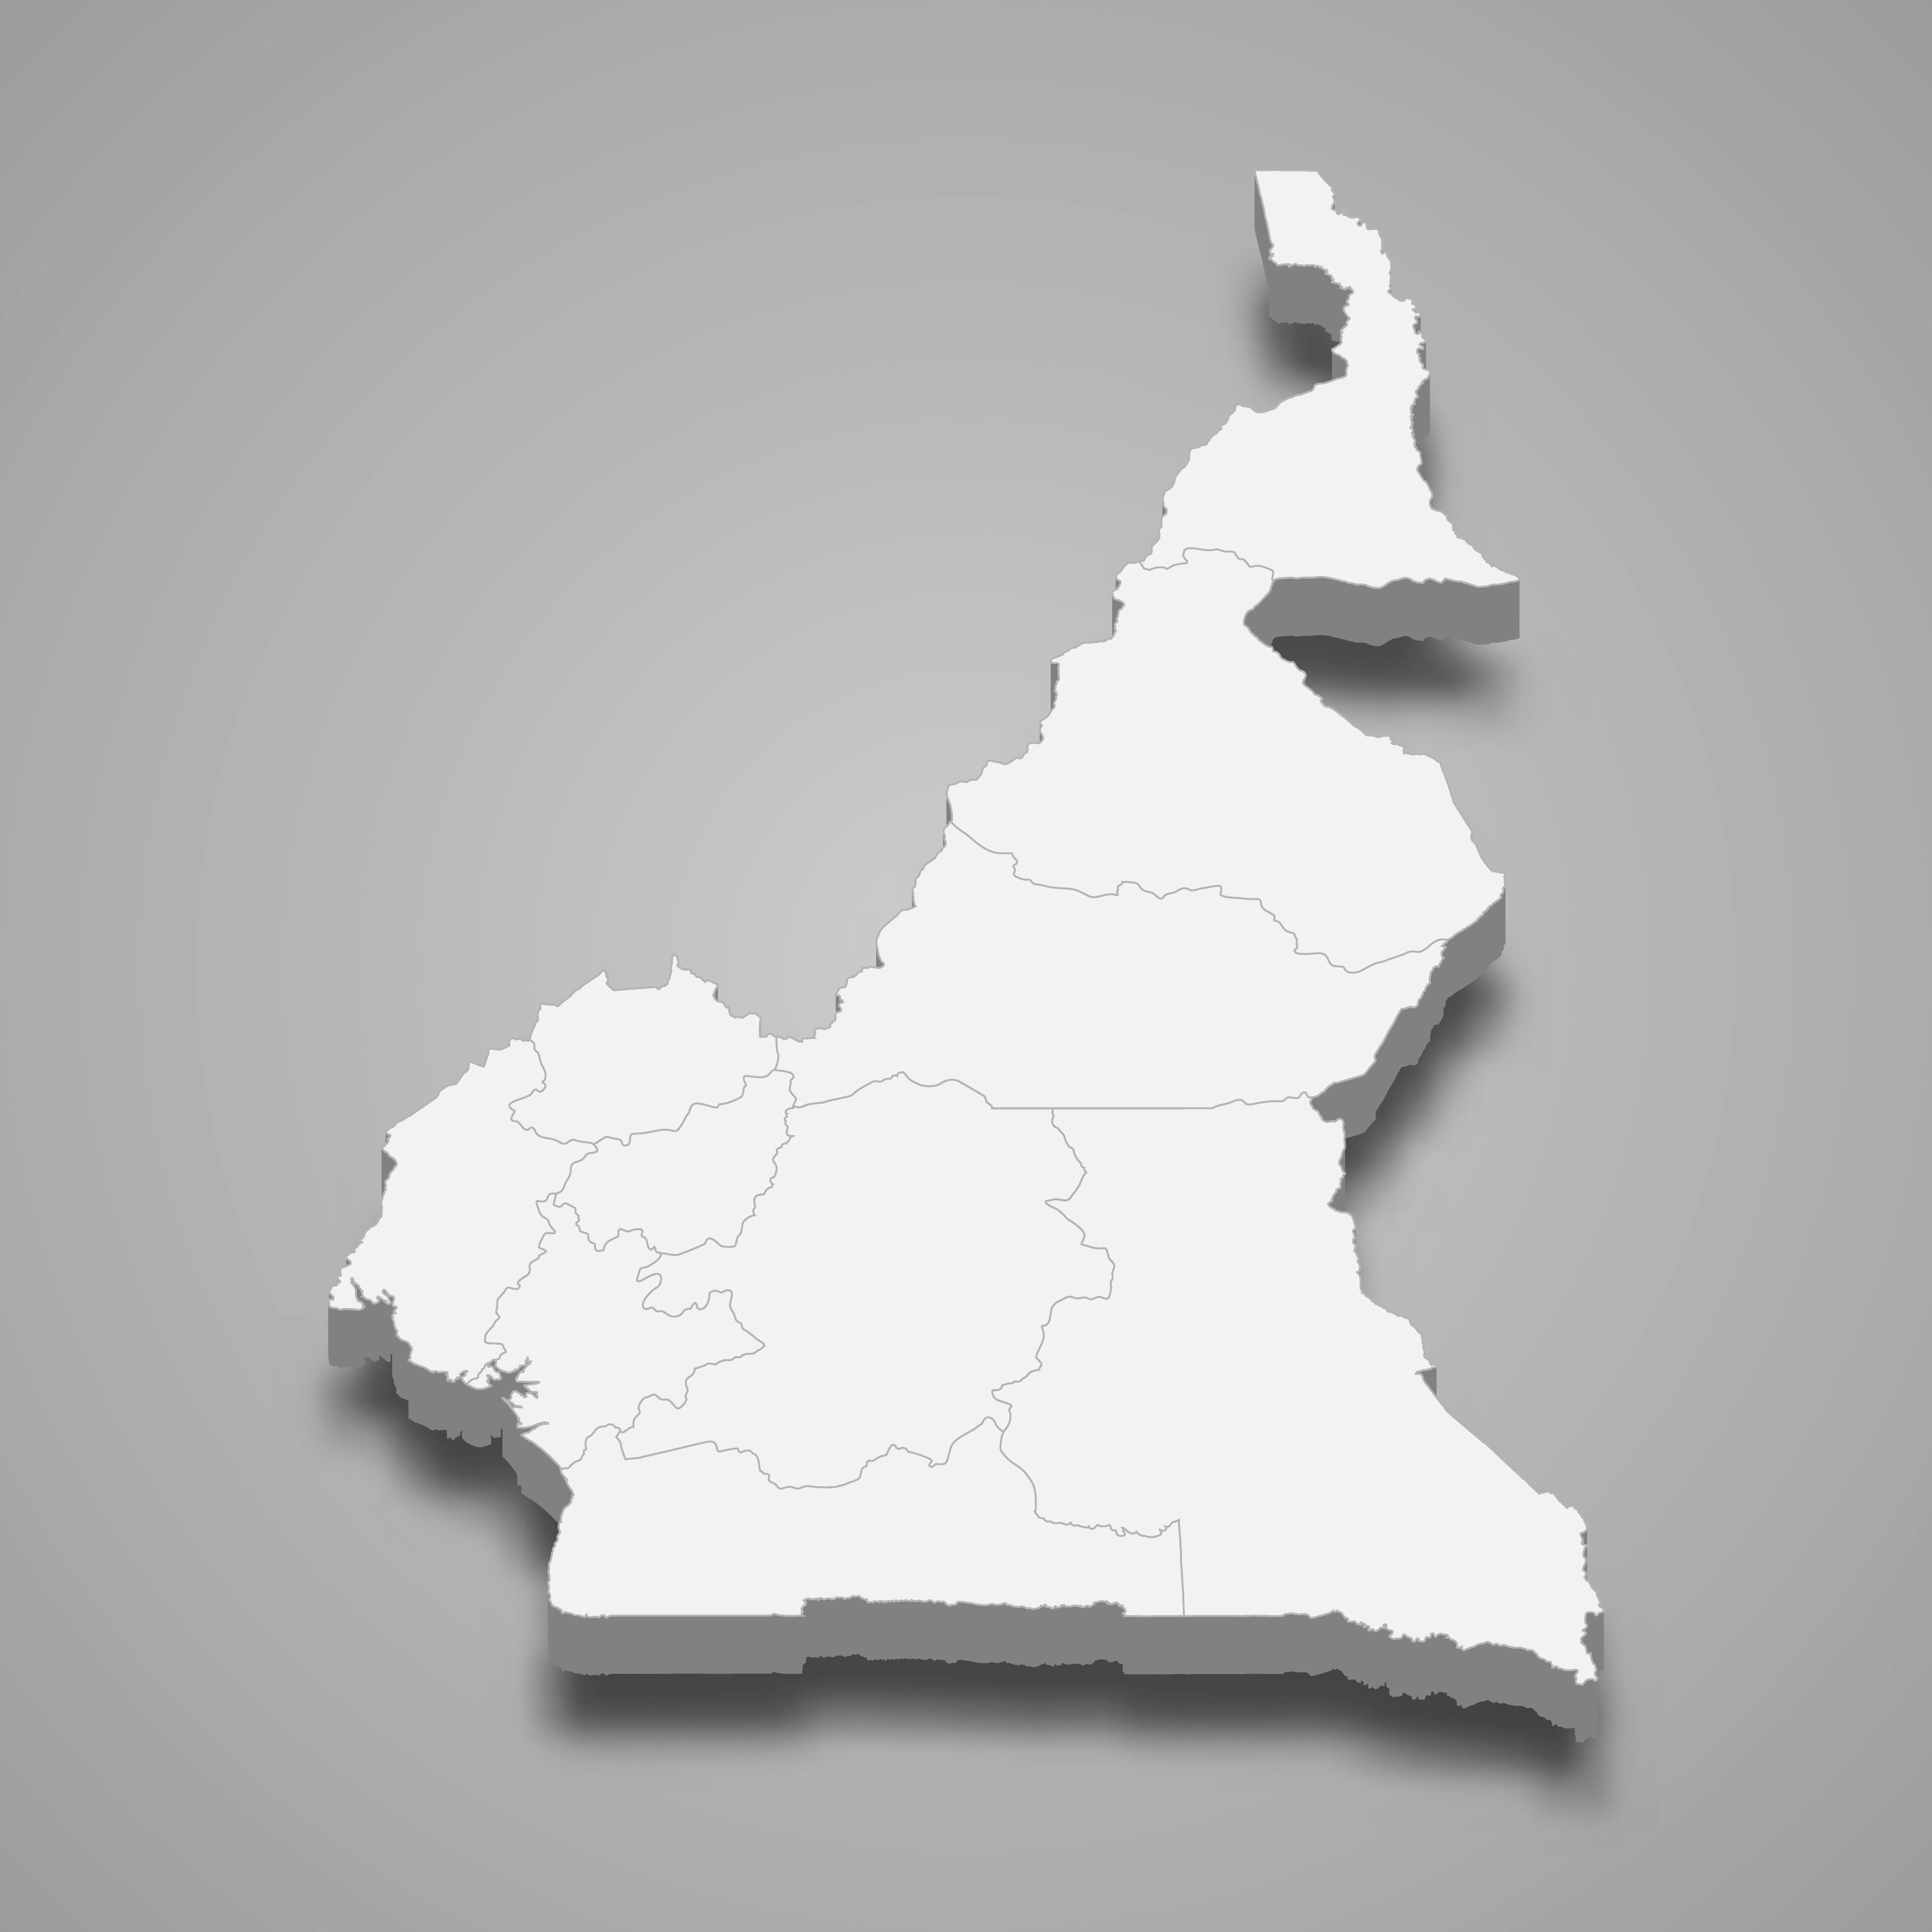 3d map of Cameroon with borders of regions. 3d map with borders of regions Template for your design